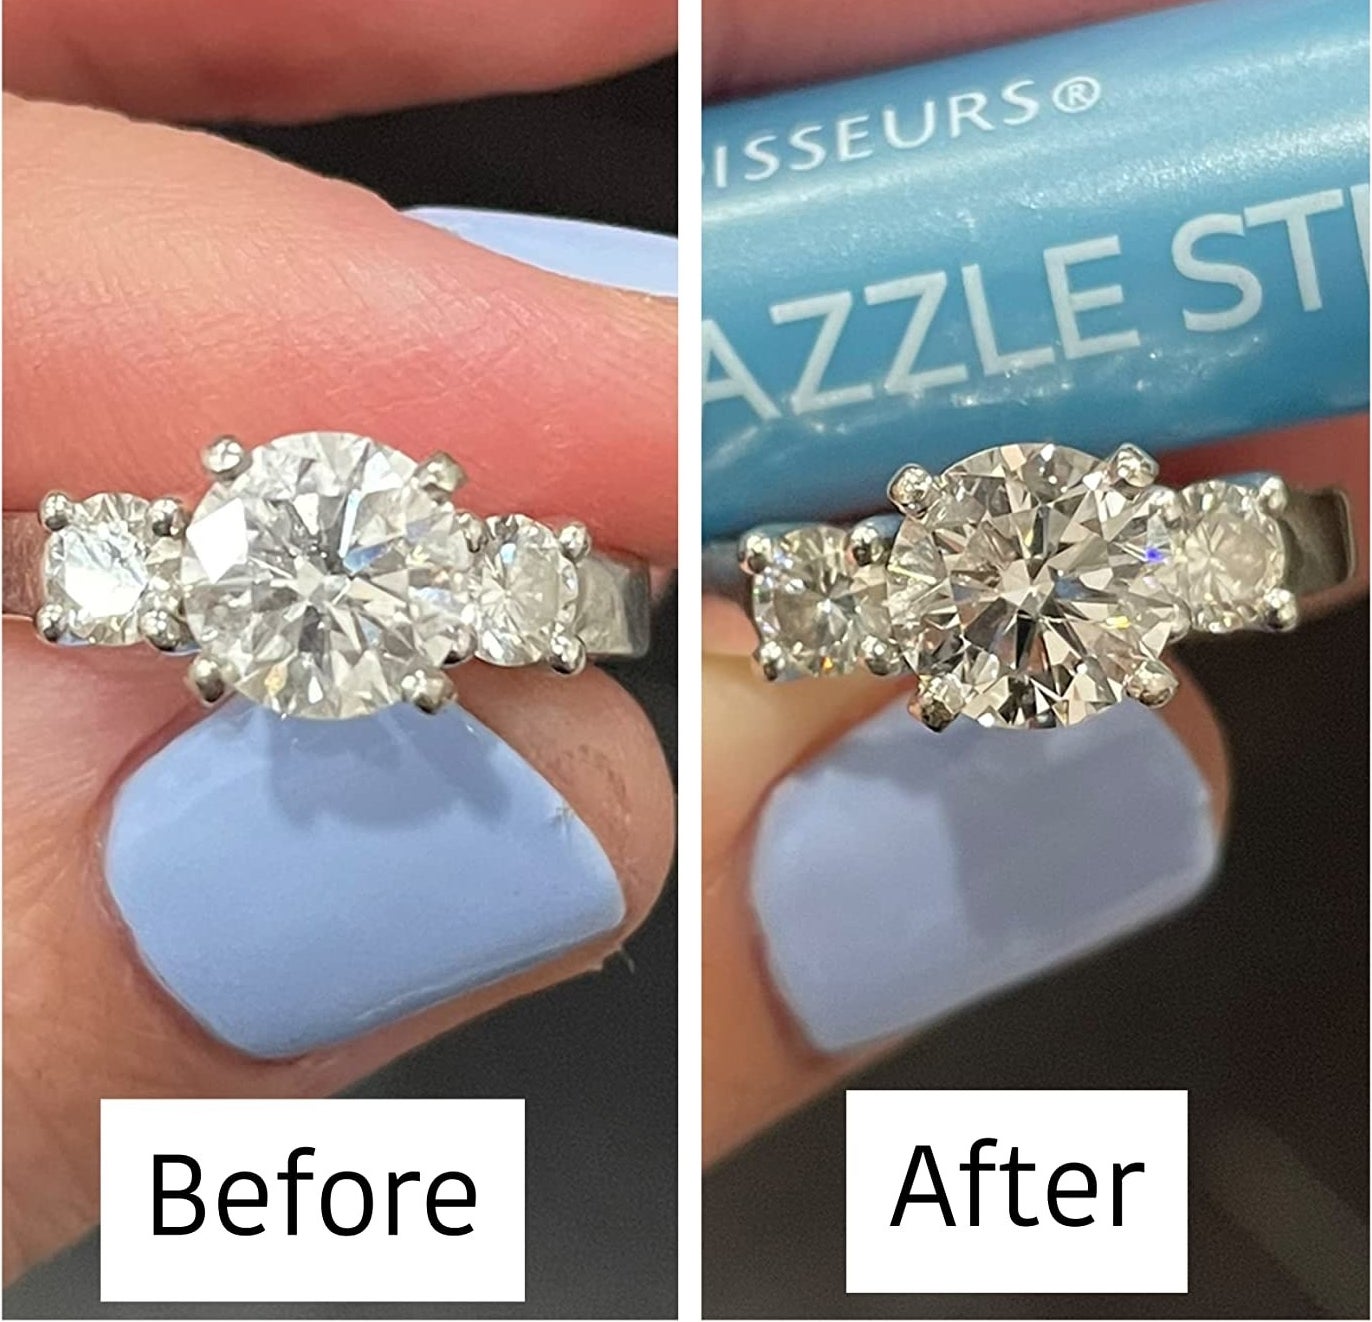 Review photo of diamond ring before and after the portable jewelry cleaner